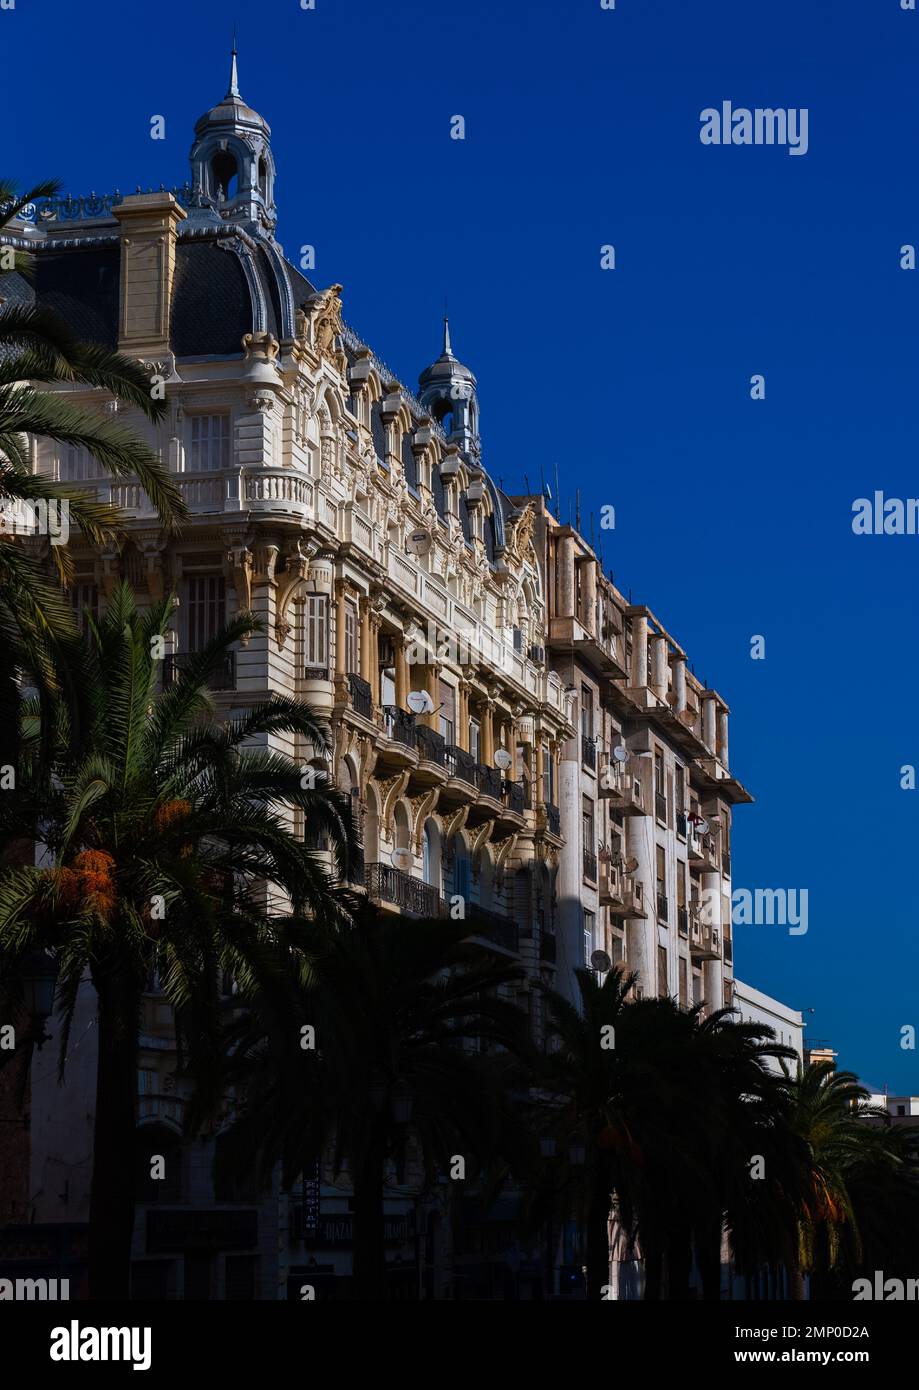 Old colonial french building, North Africa, Oran, Algeria Stock Photo